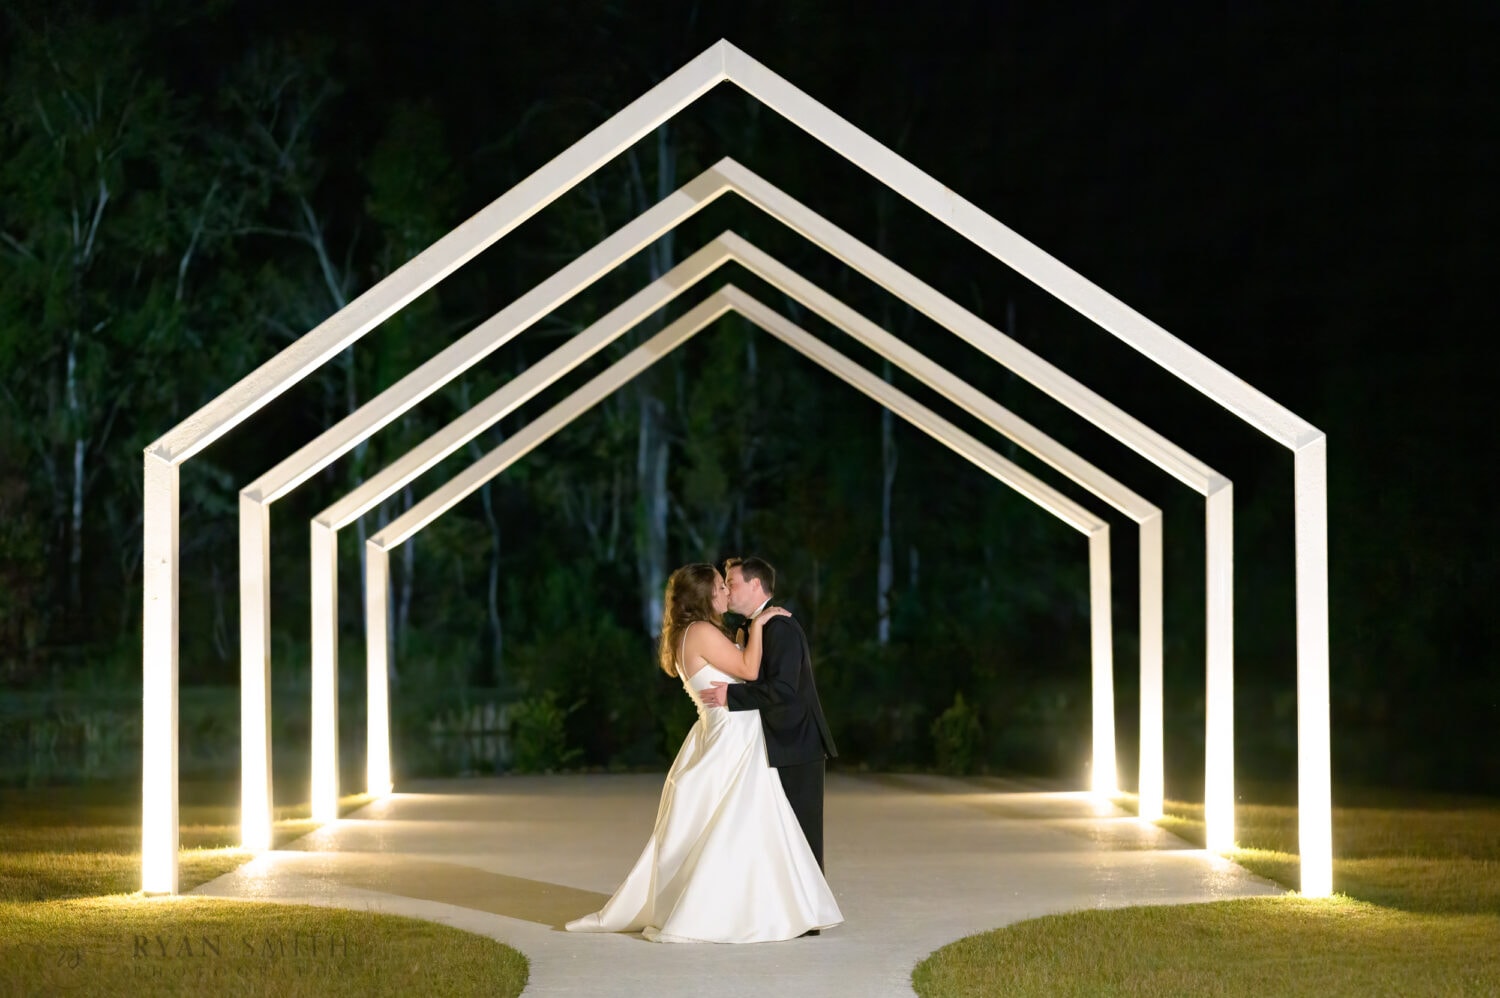 Nighttime under the wedding arches  - The Venue at White Oaks Farm